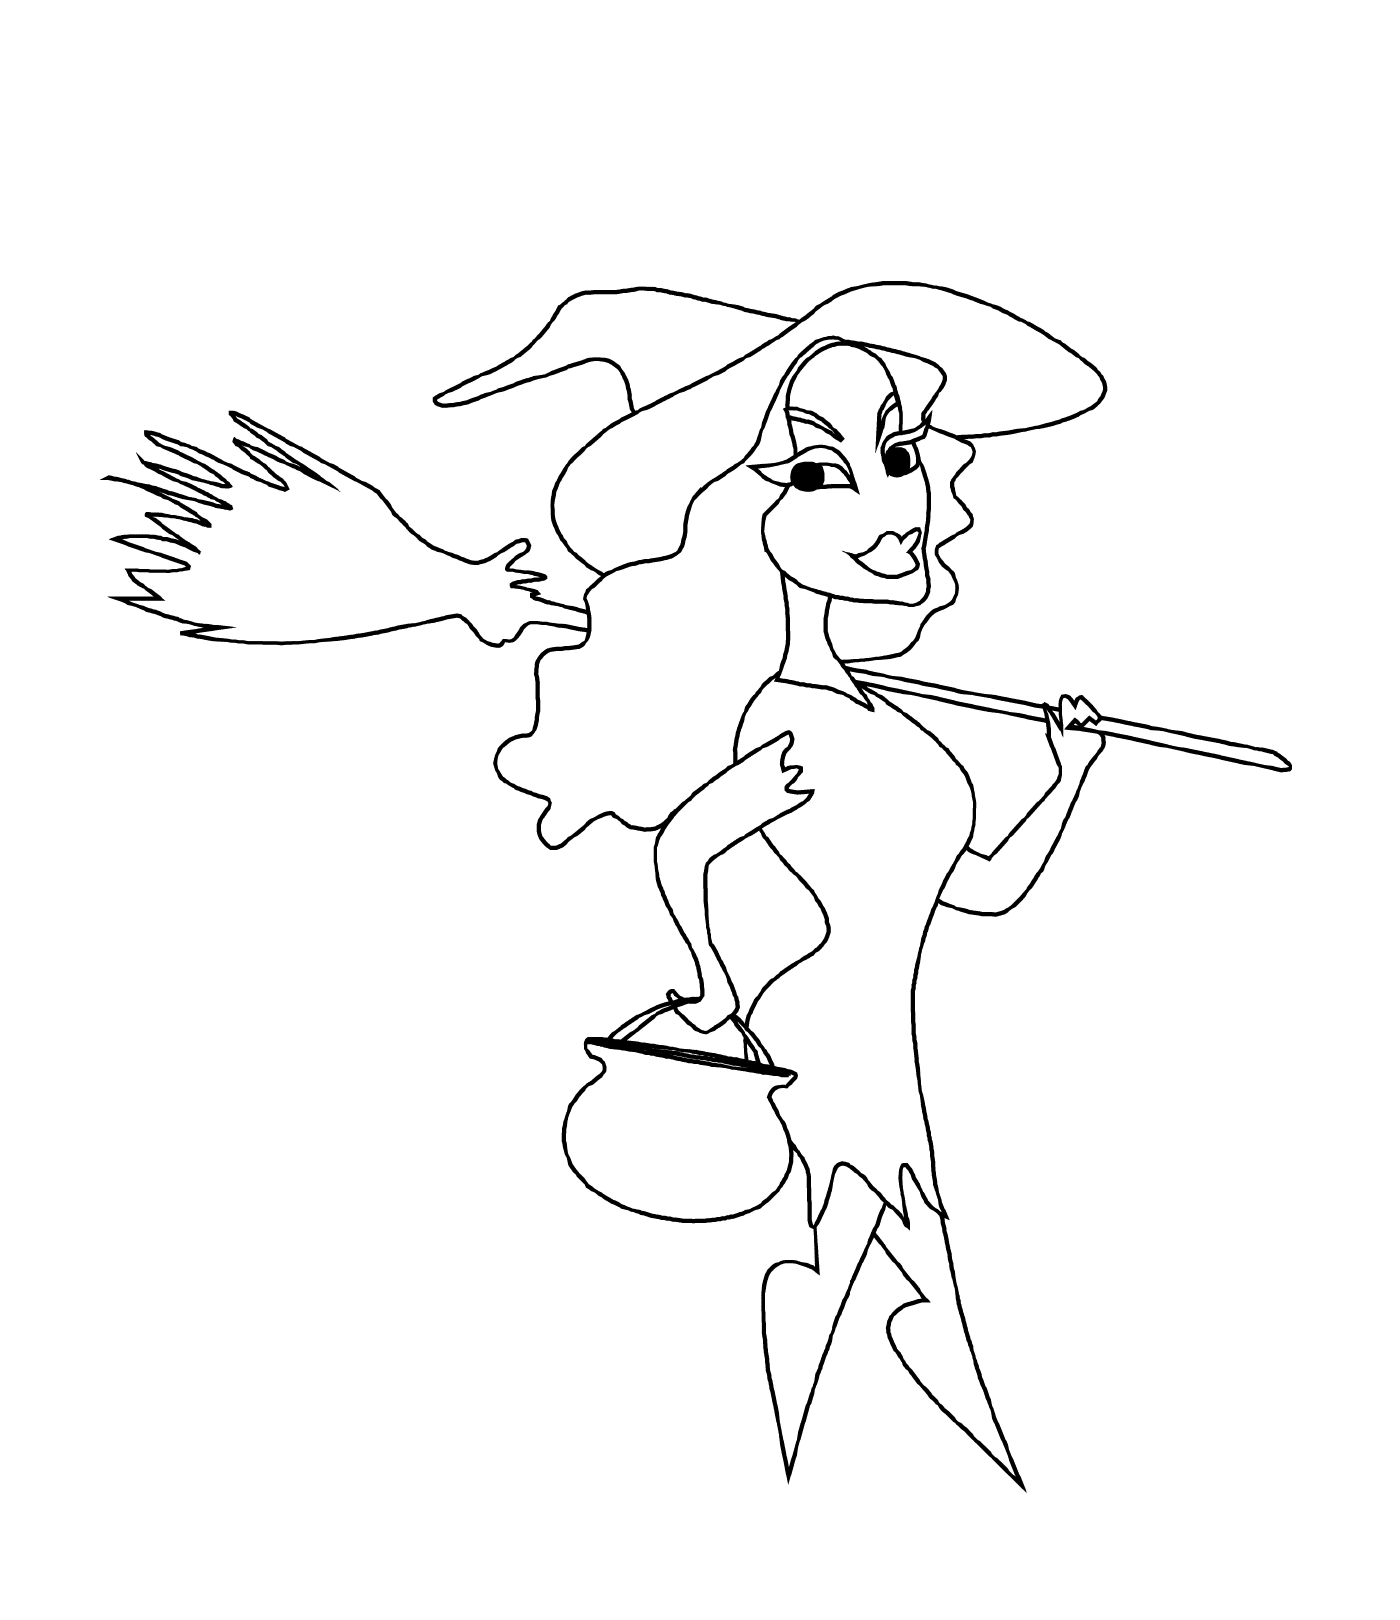  witch holding a broom and a pot 